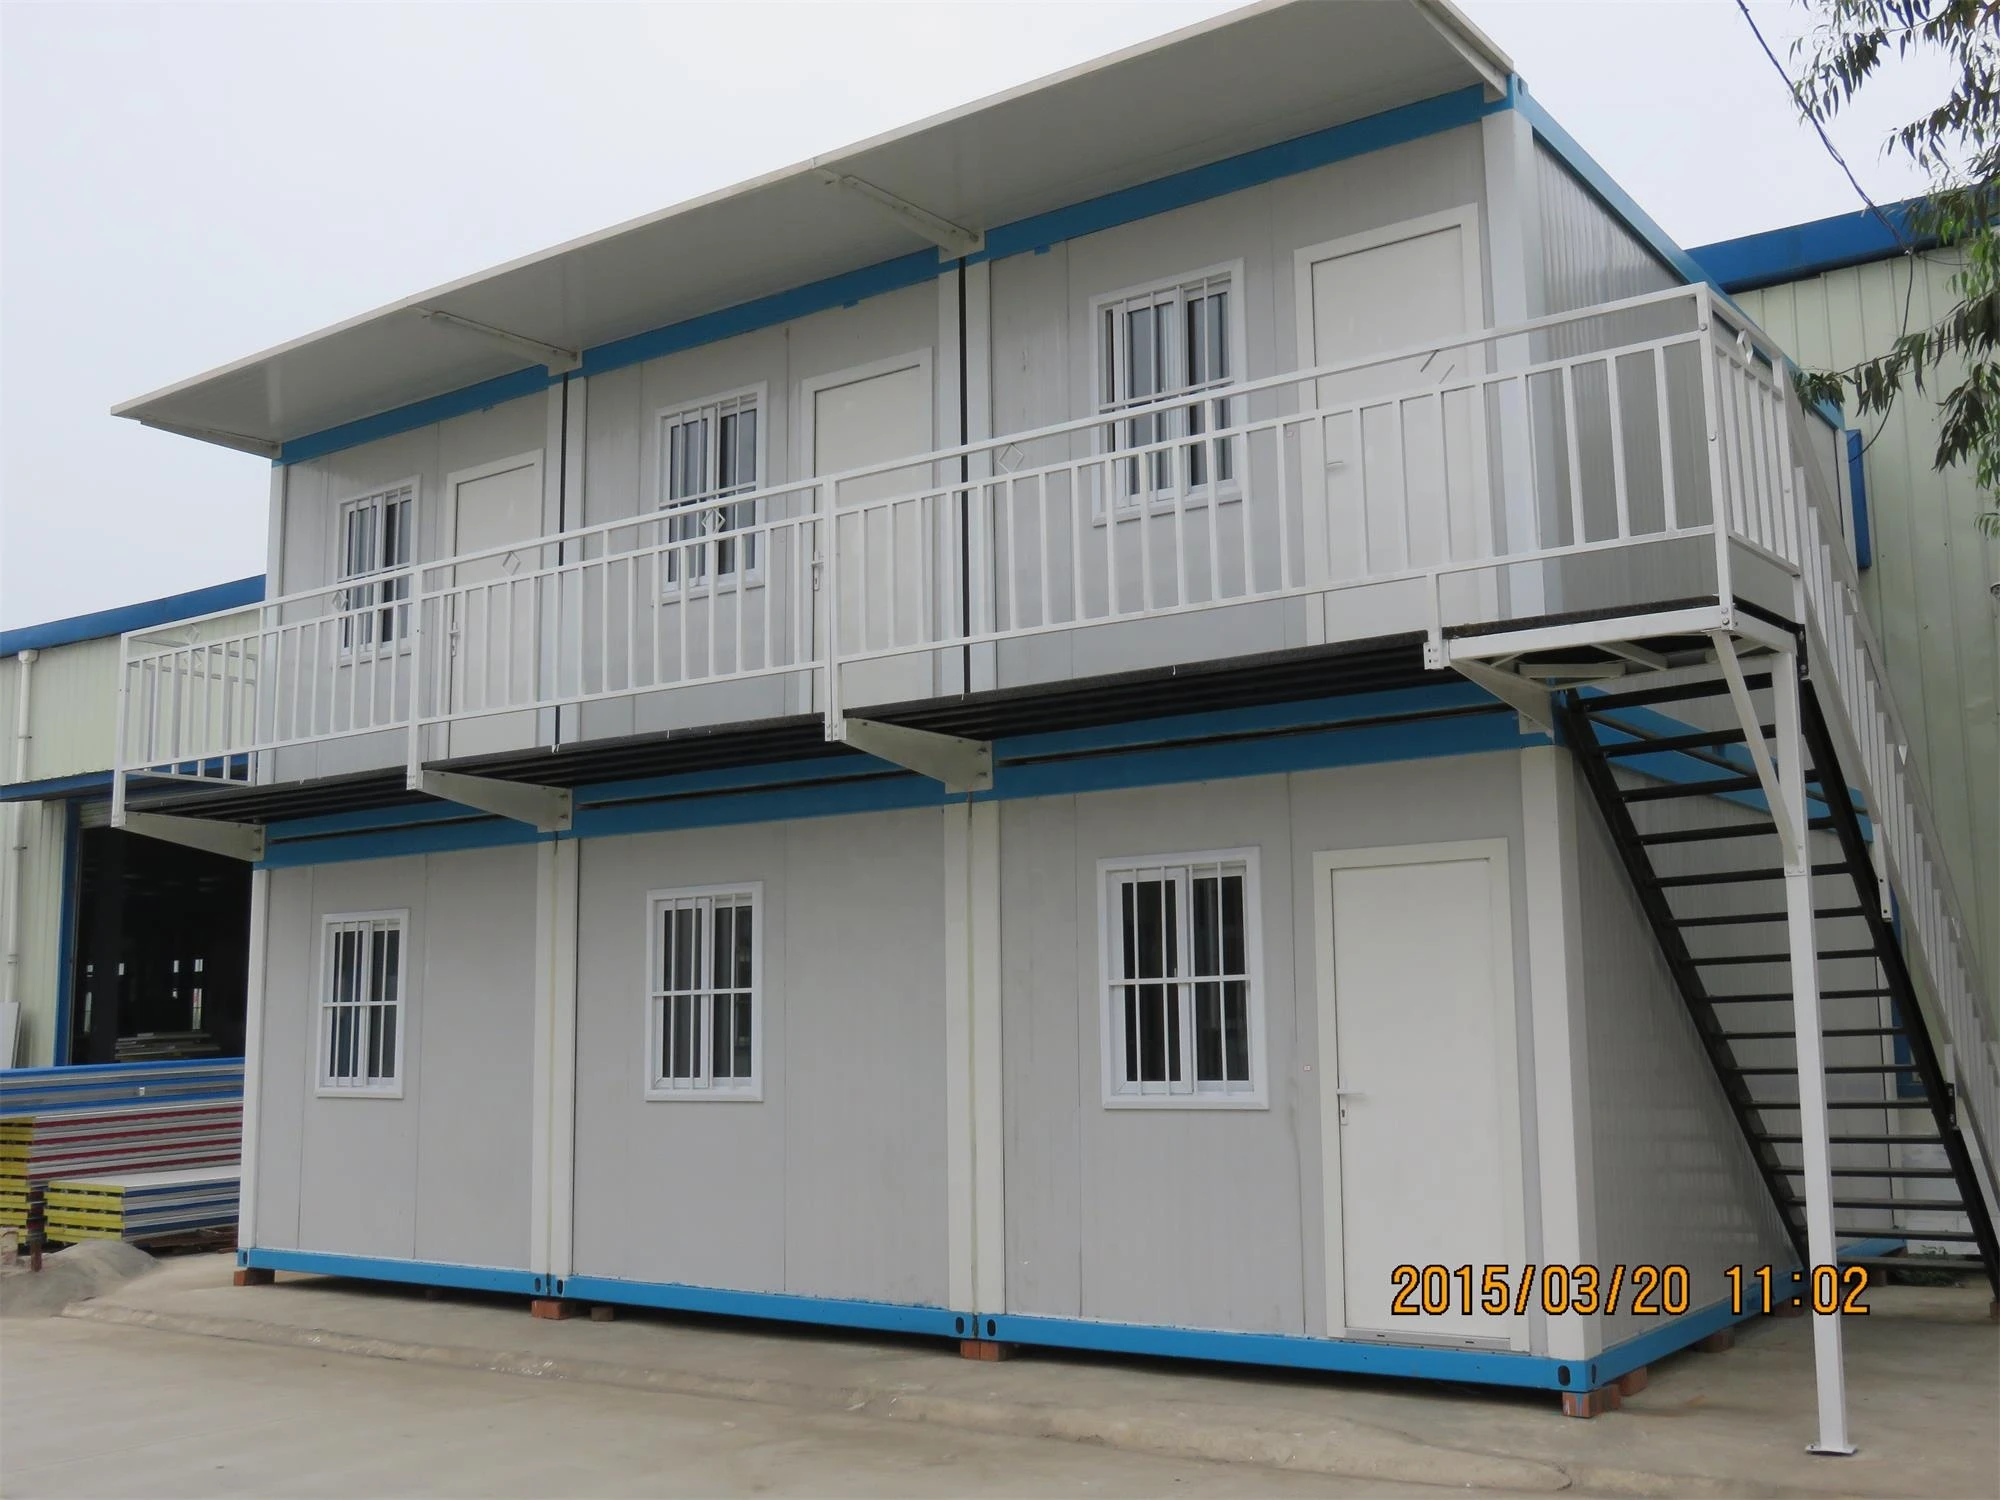 JM cheap modern tiny flat pack mobile 3 bedroom prefab modular small home containers casas house prefabricated